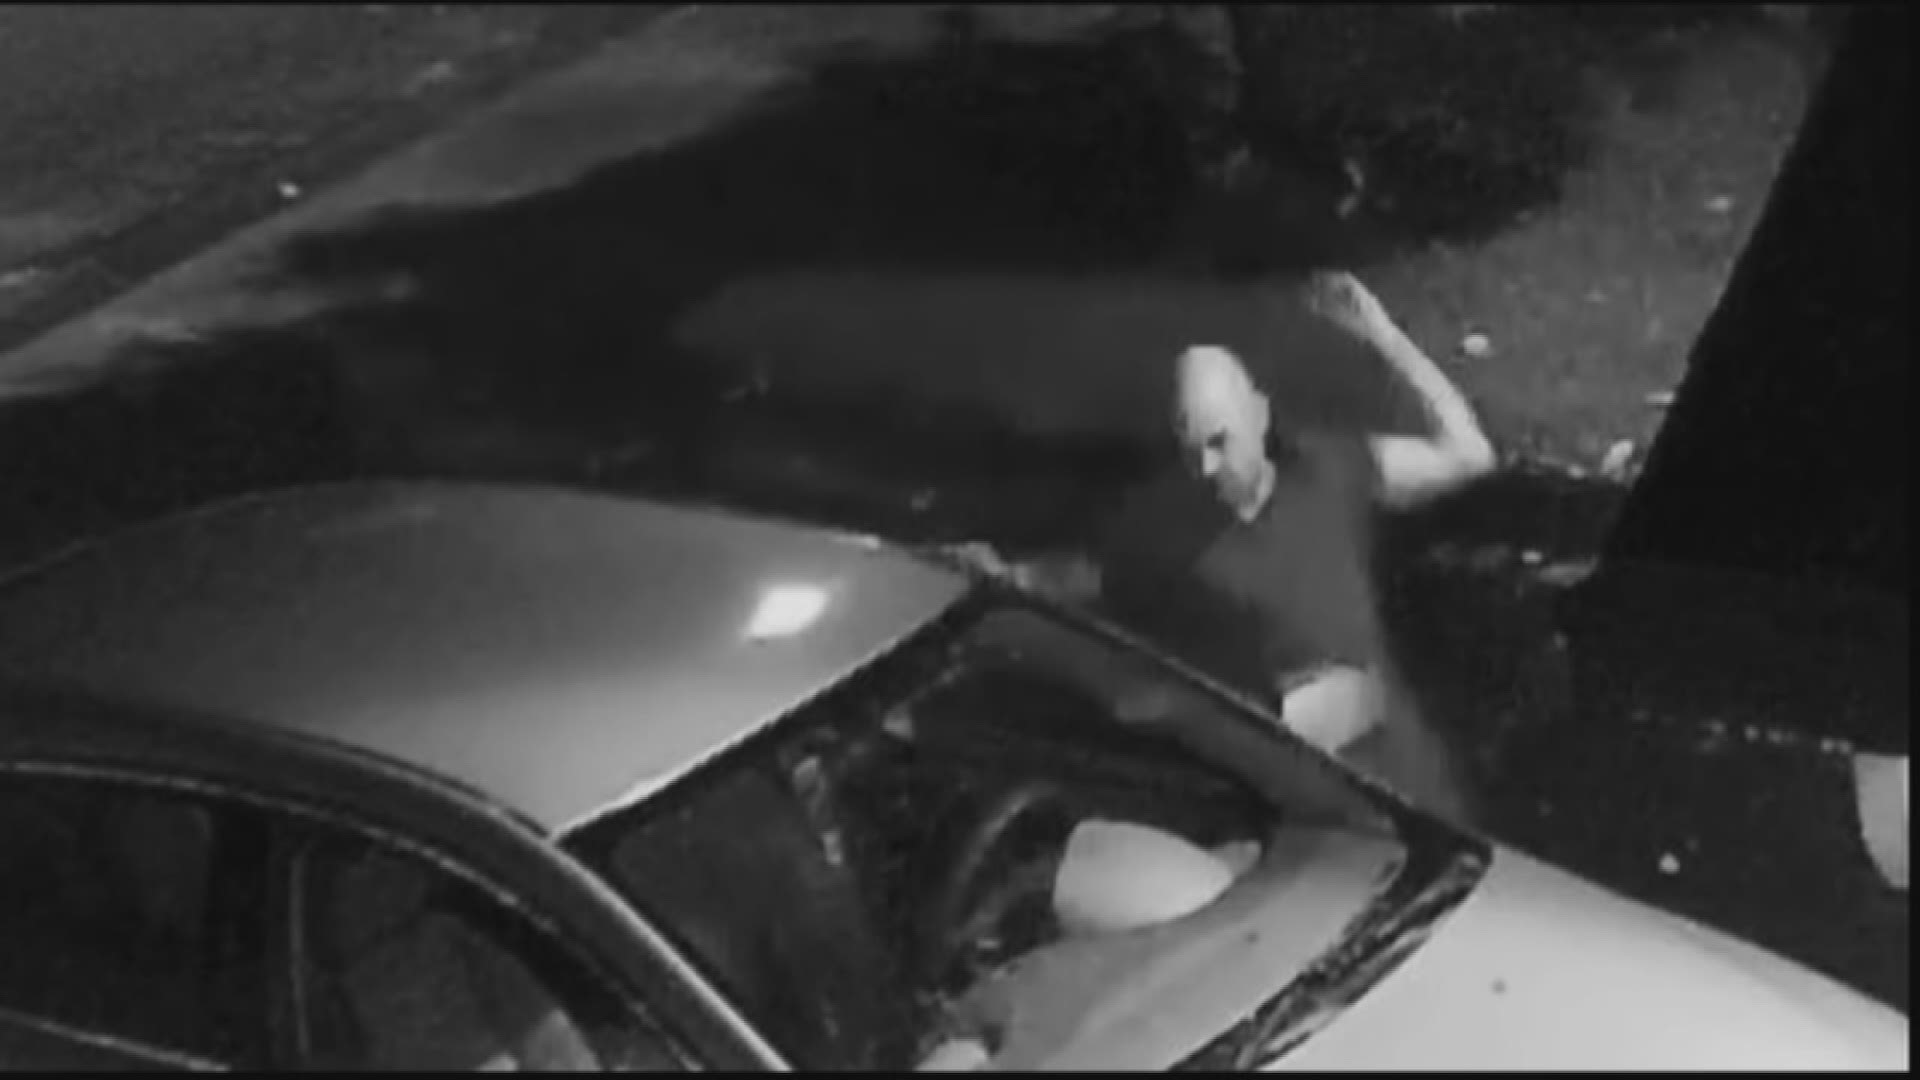 Camera catches vandal smashing windshield of car in Vancouver